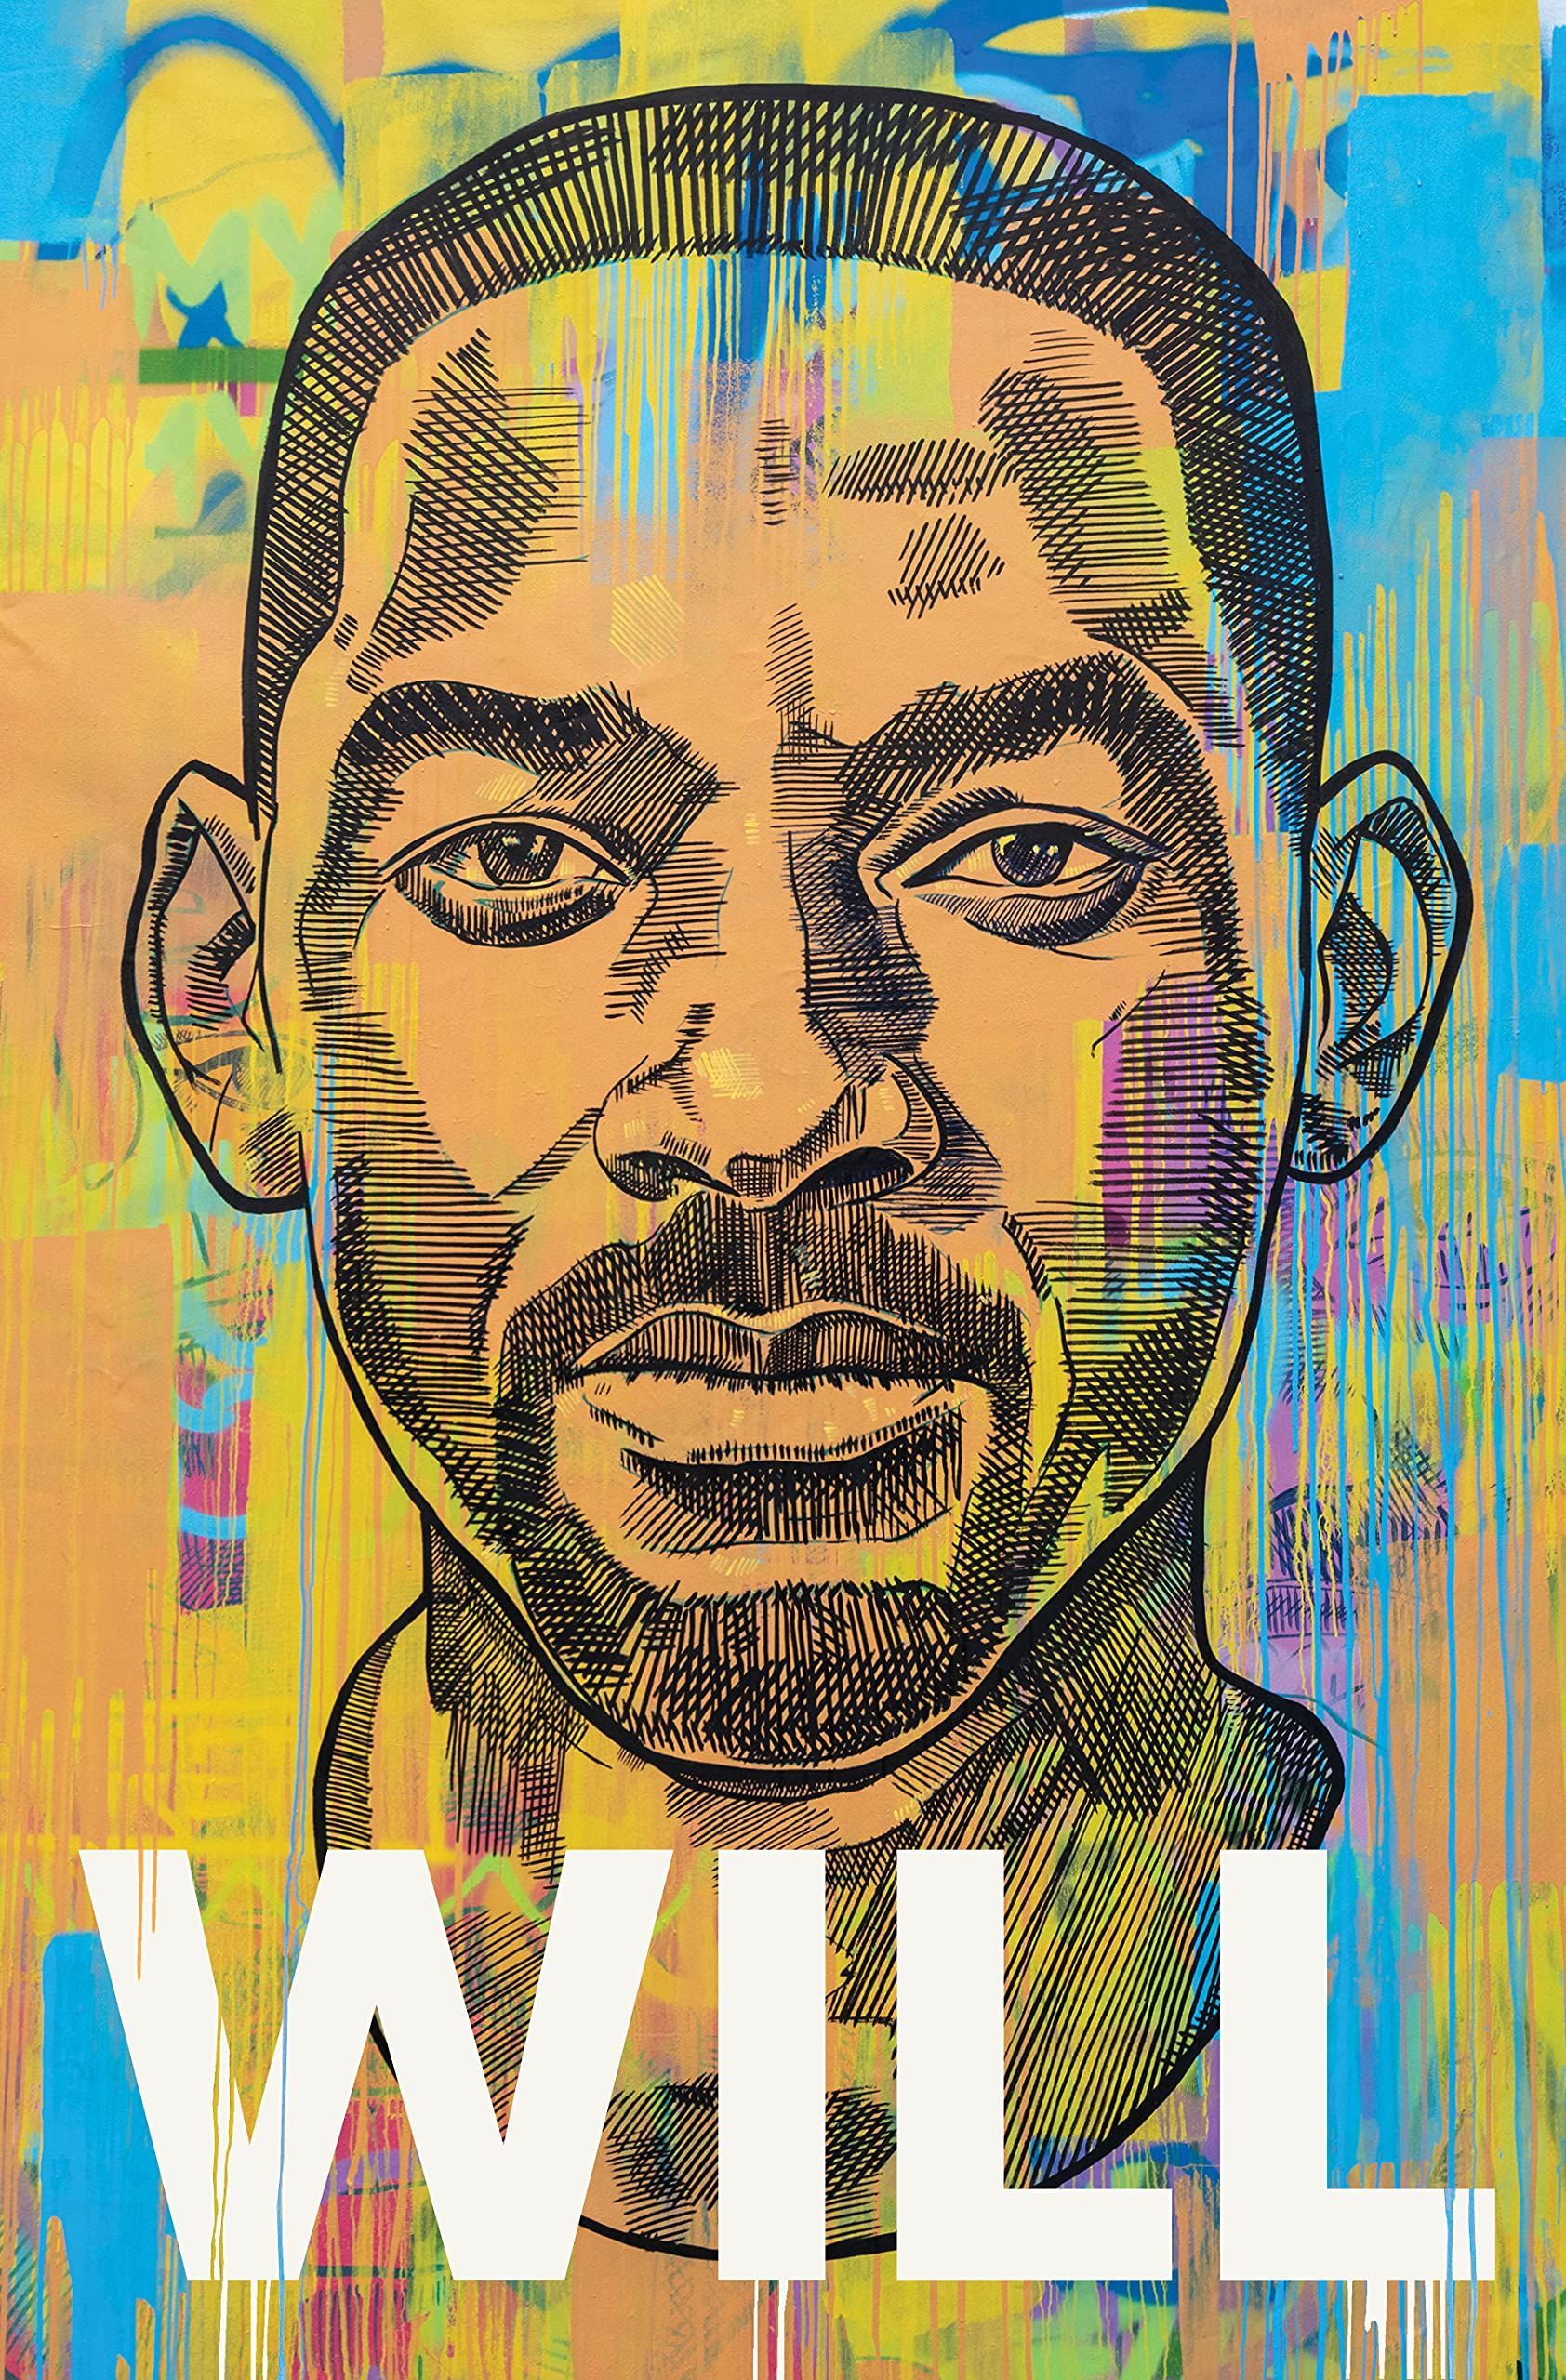 "Will" by Will Smith